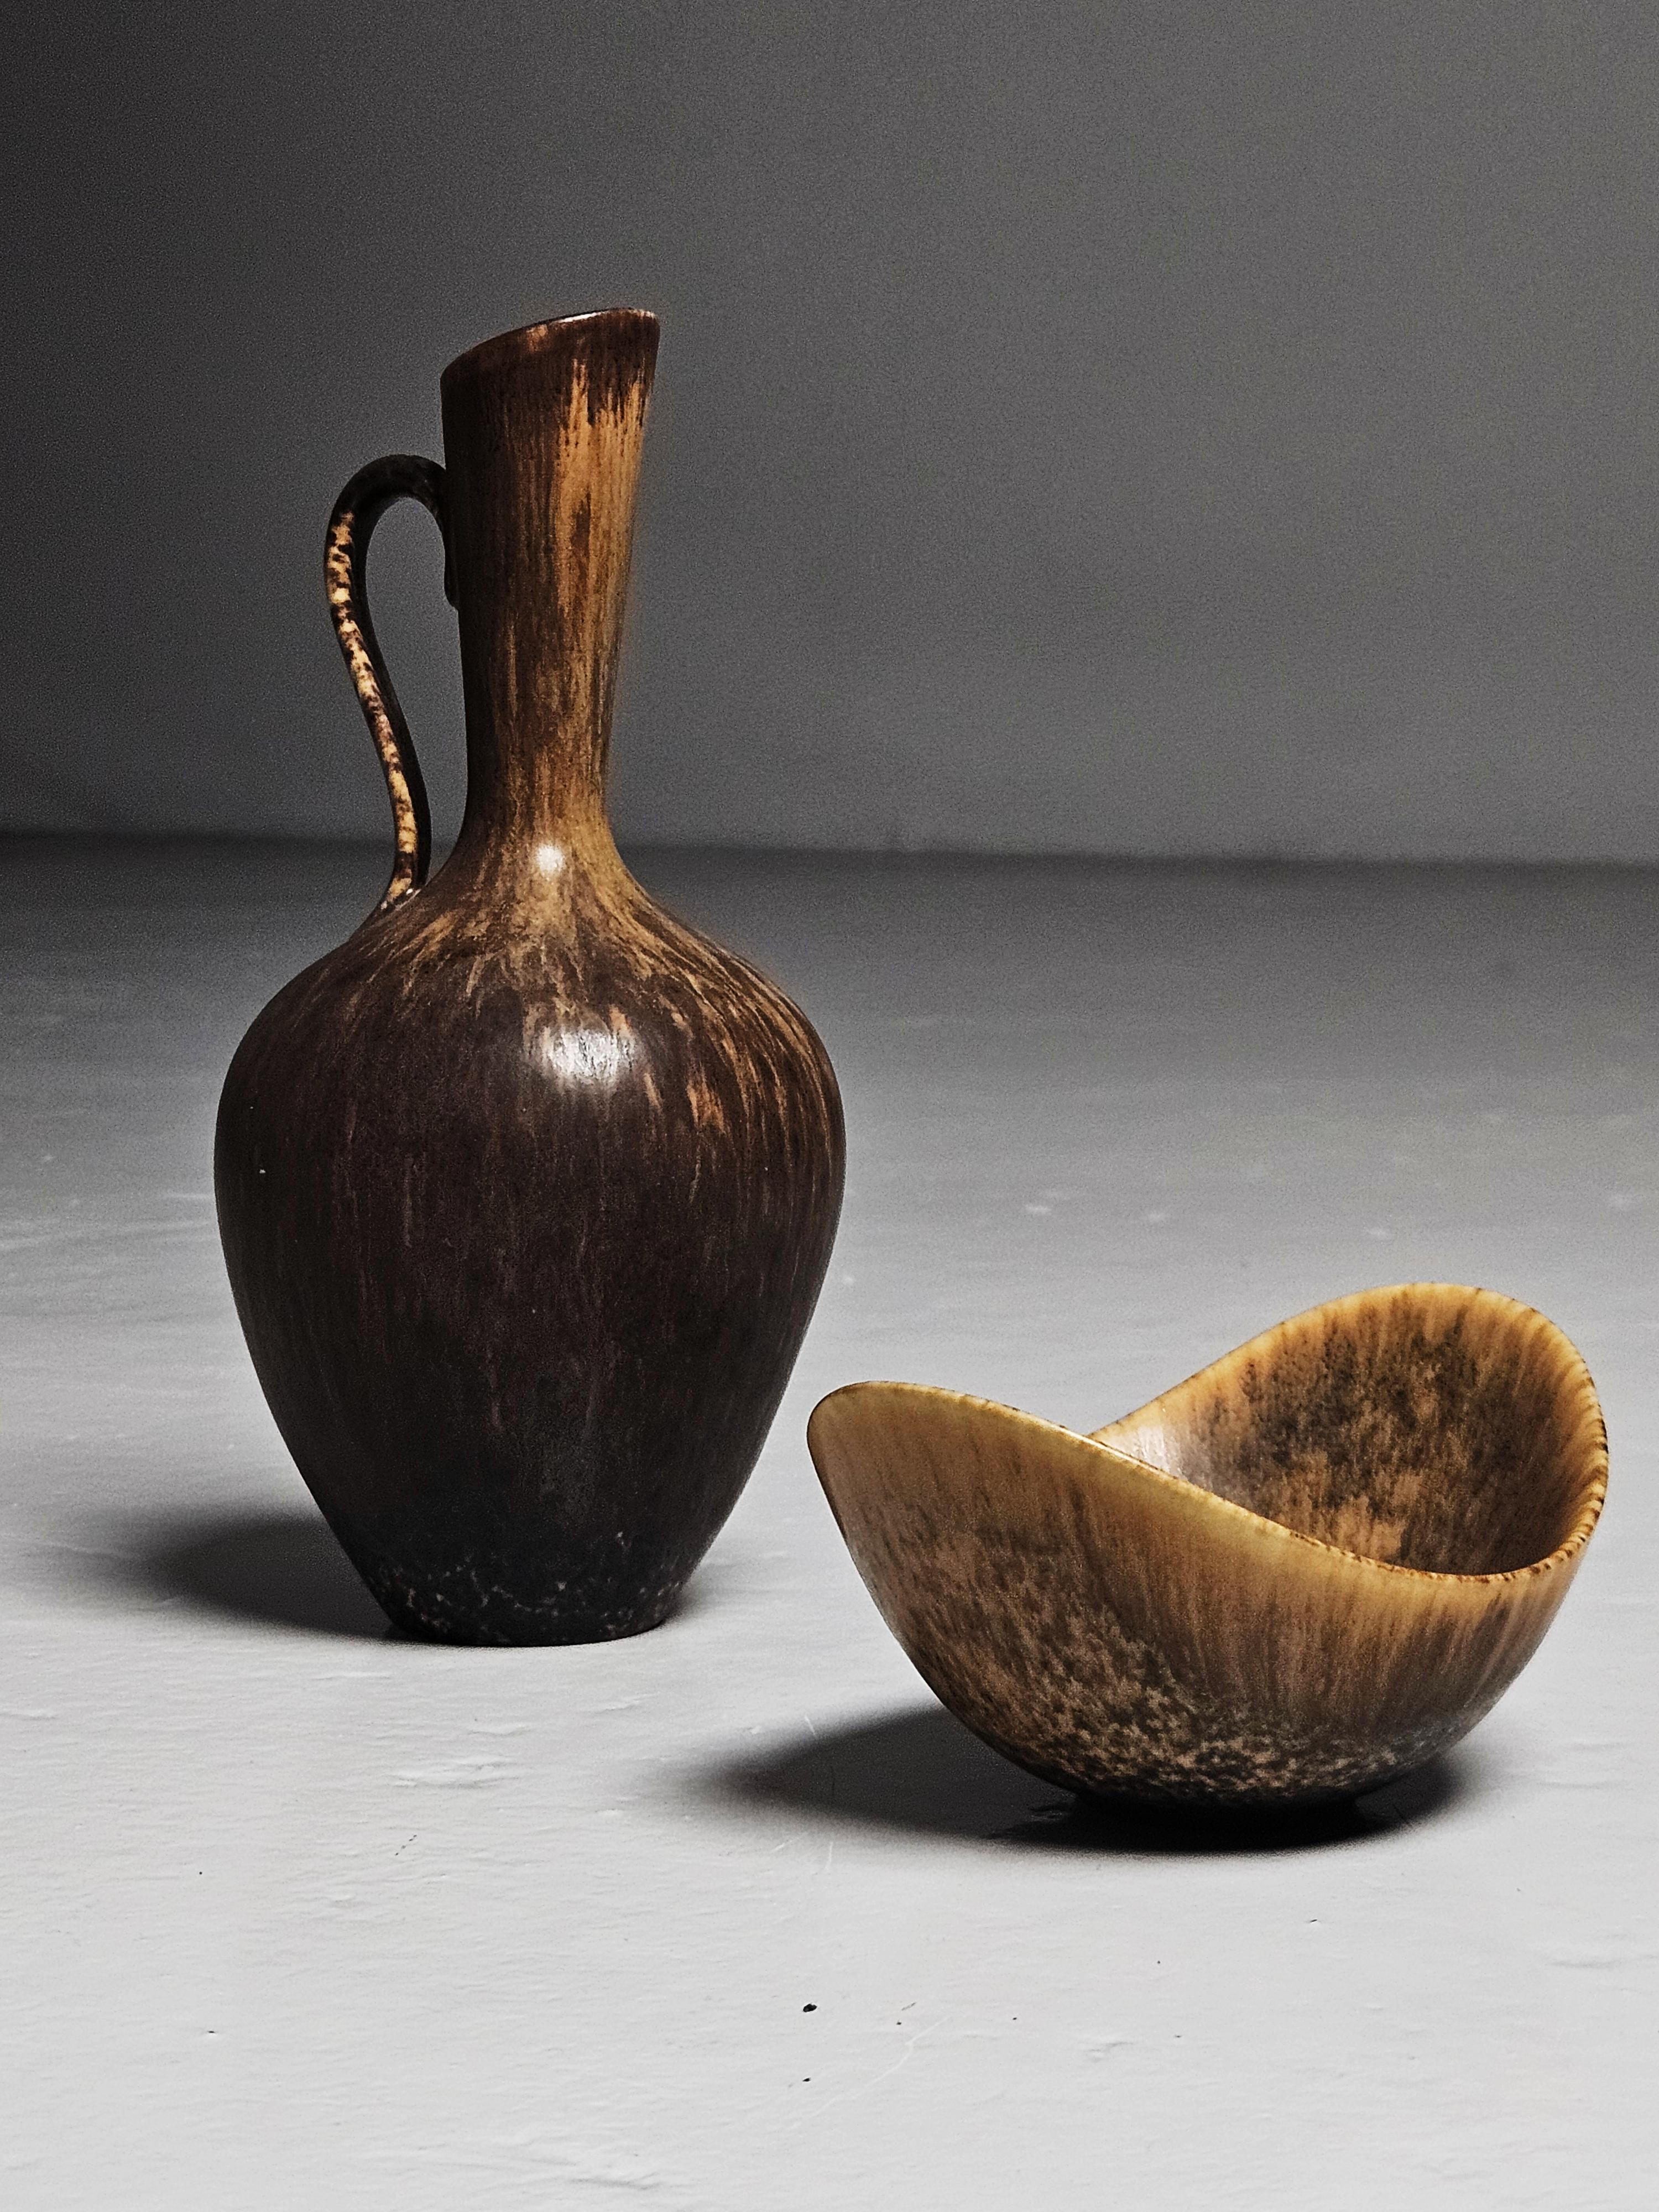 Small bowl and vase designed by Gunnar Nylund and produced by Rörstrand, Sweden, during the 1950s. 

Both with beautiful earthy toned glaze. 

Dimensions of bowl: Height: 1.97 in (5 cm)Width: 2.96 in (7.5 cm)Depth: 3.94 in (10 cm)

Dimensions vase: